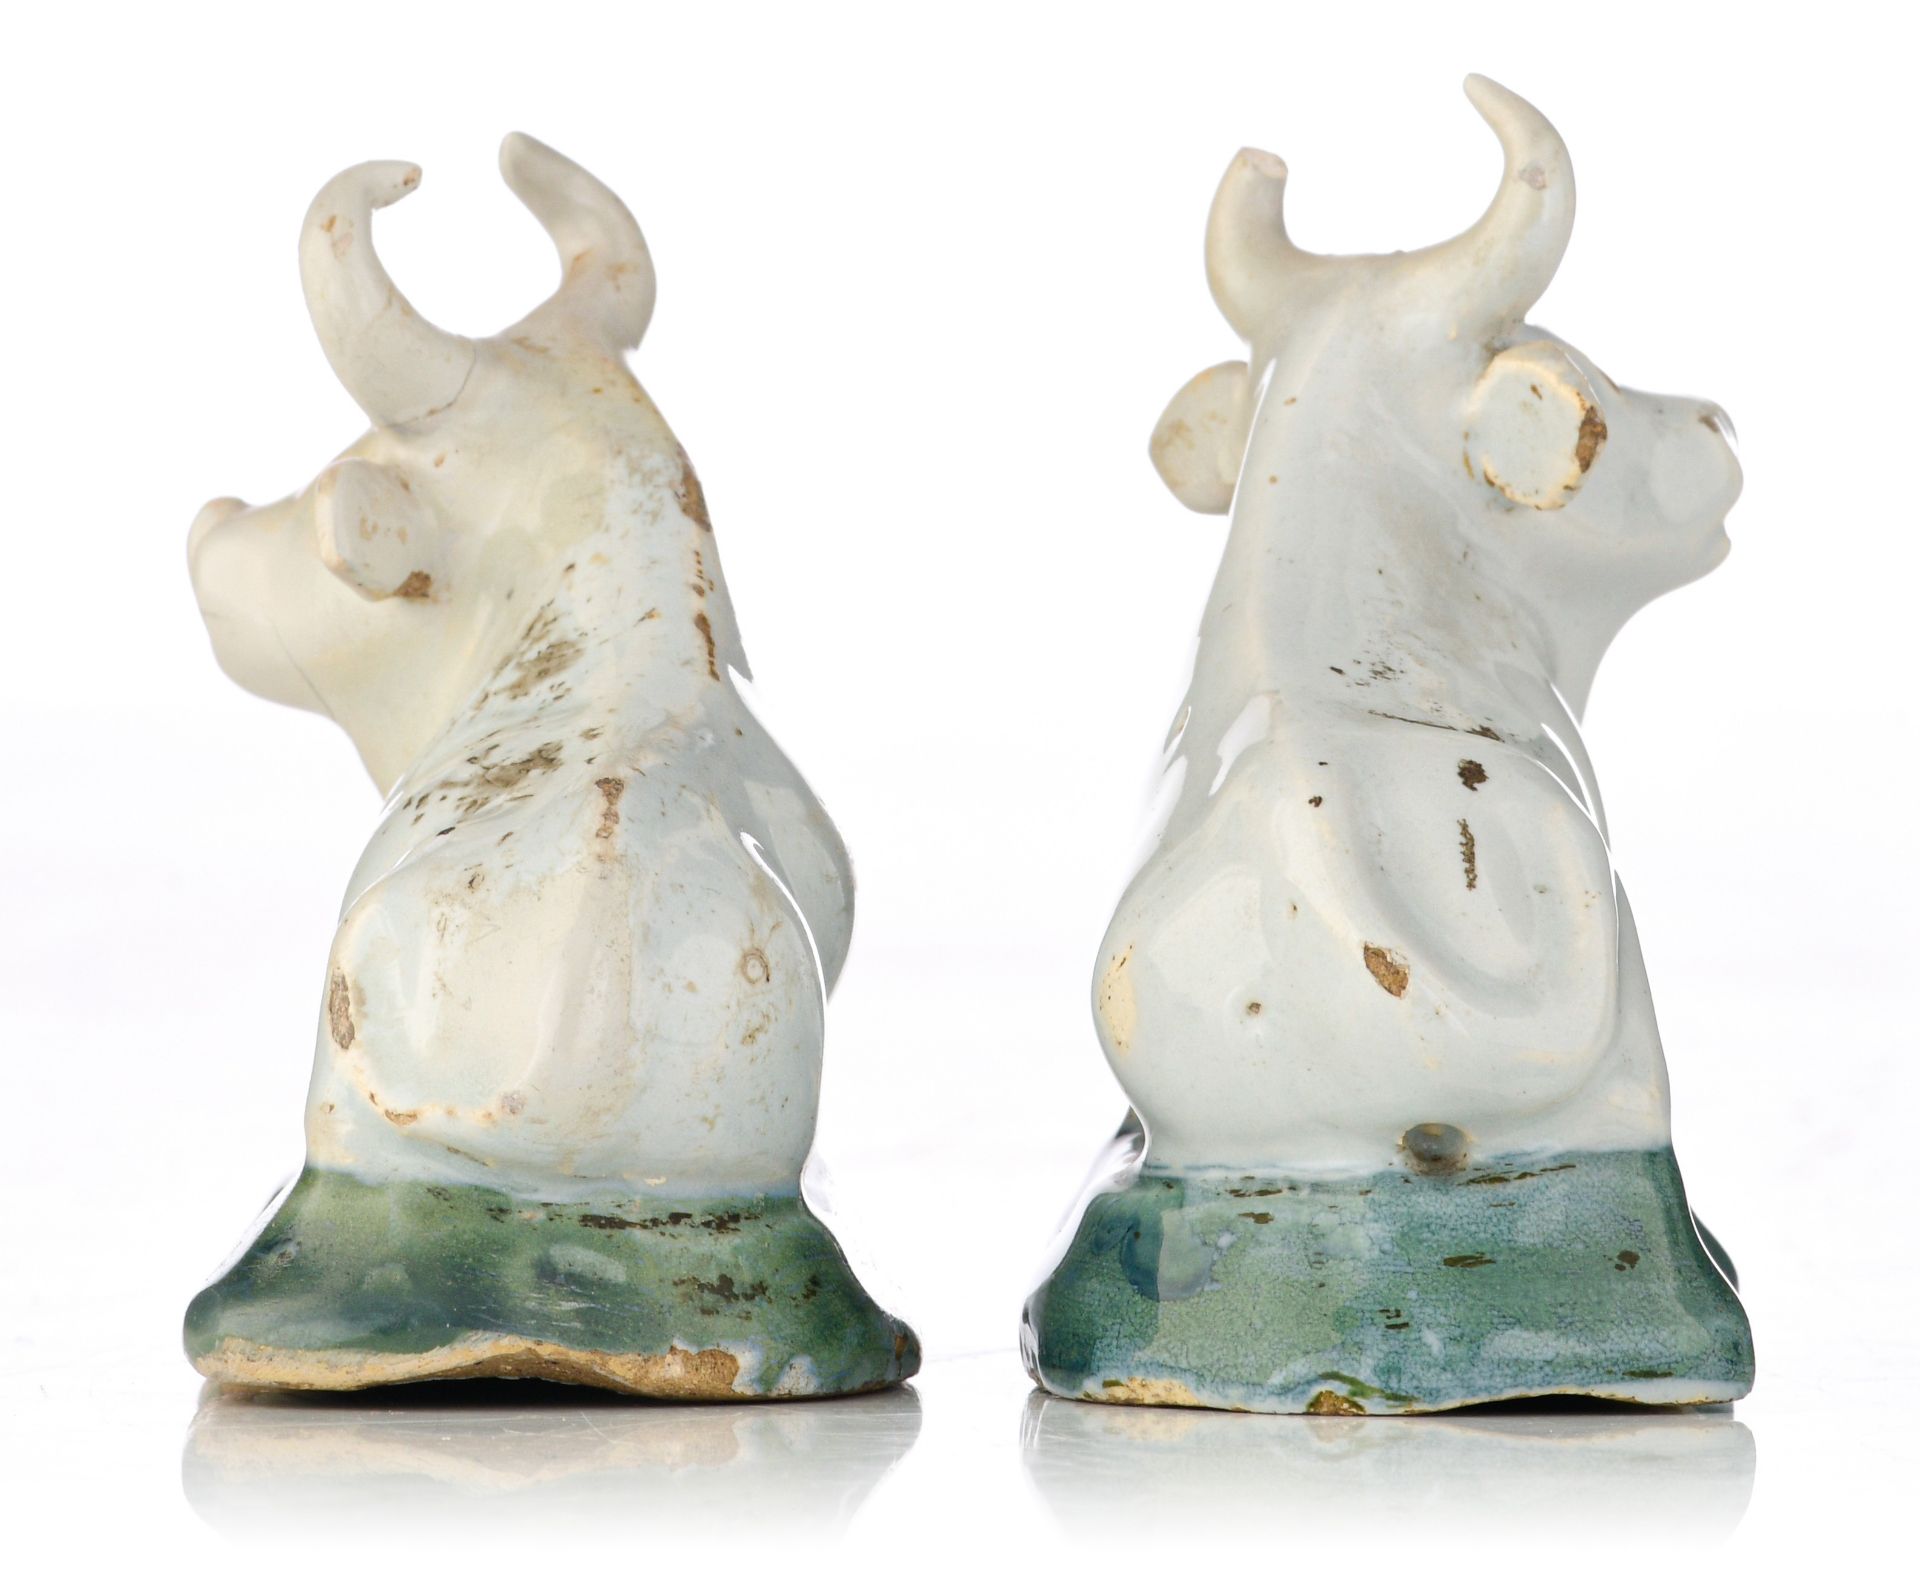 (BIDDING ONLY ON CARLOBONTE.BE) A rare pair of white Delft figures of cows, 18thC, marked Geertruy V - Image 4 of 16